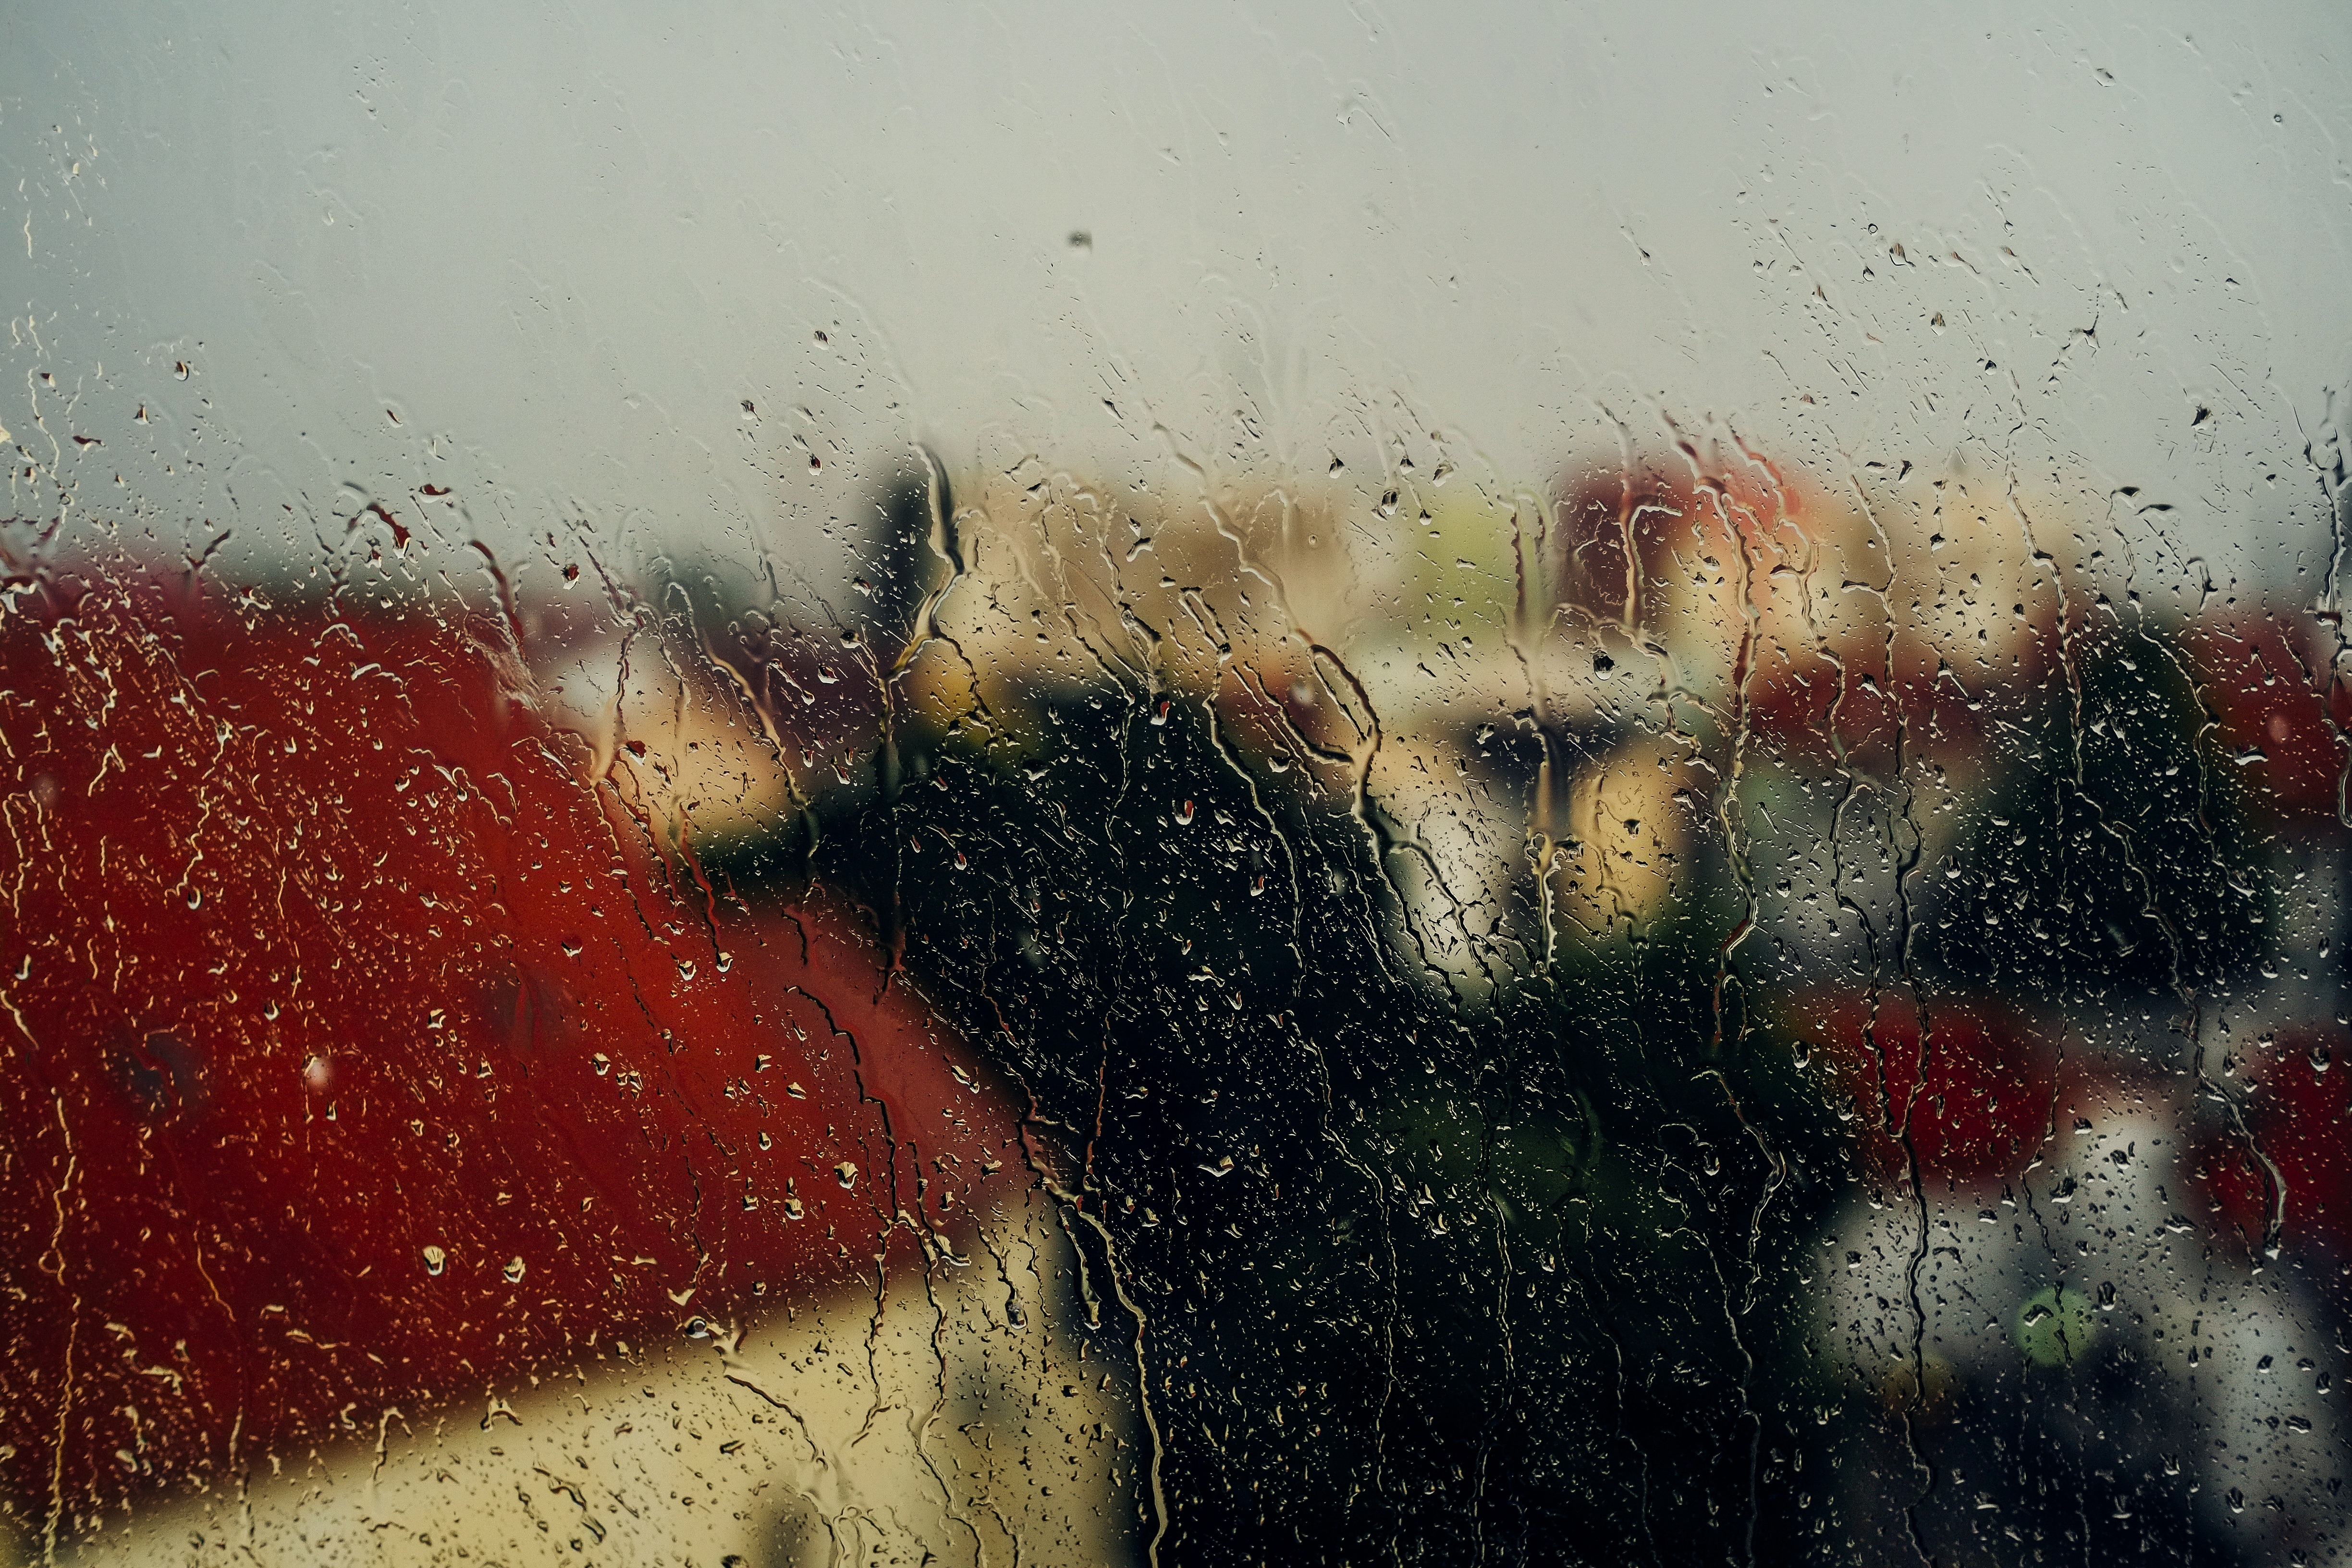 128272 download wallpaper rain, glass, drops, macro, wet, window, humid screensavers and pictures for free